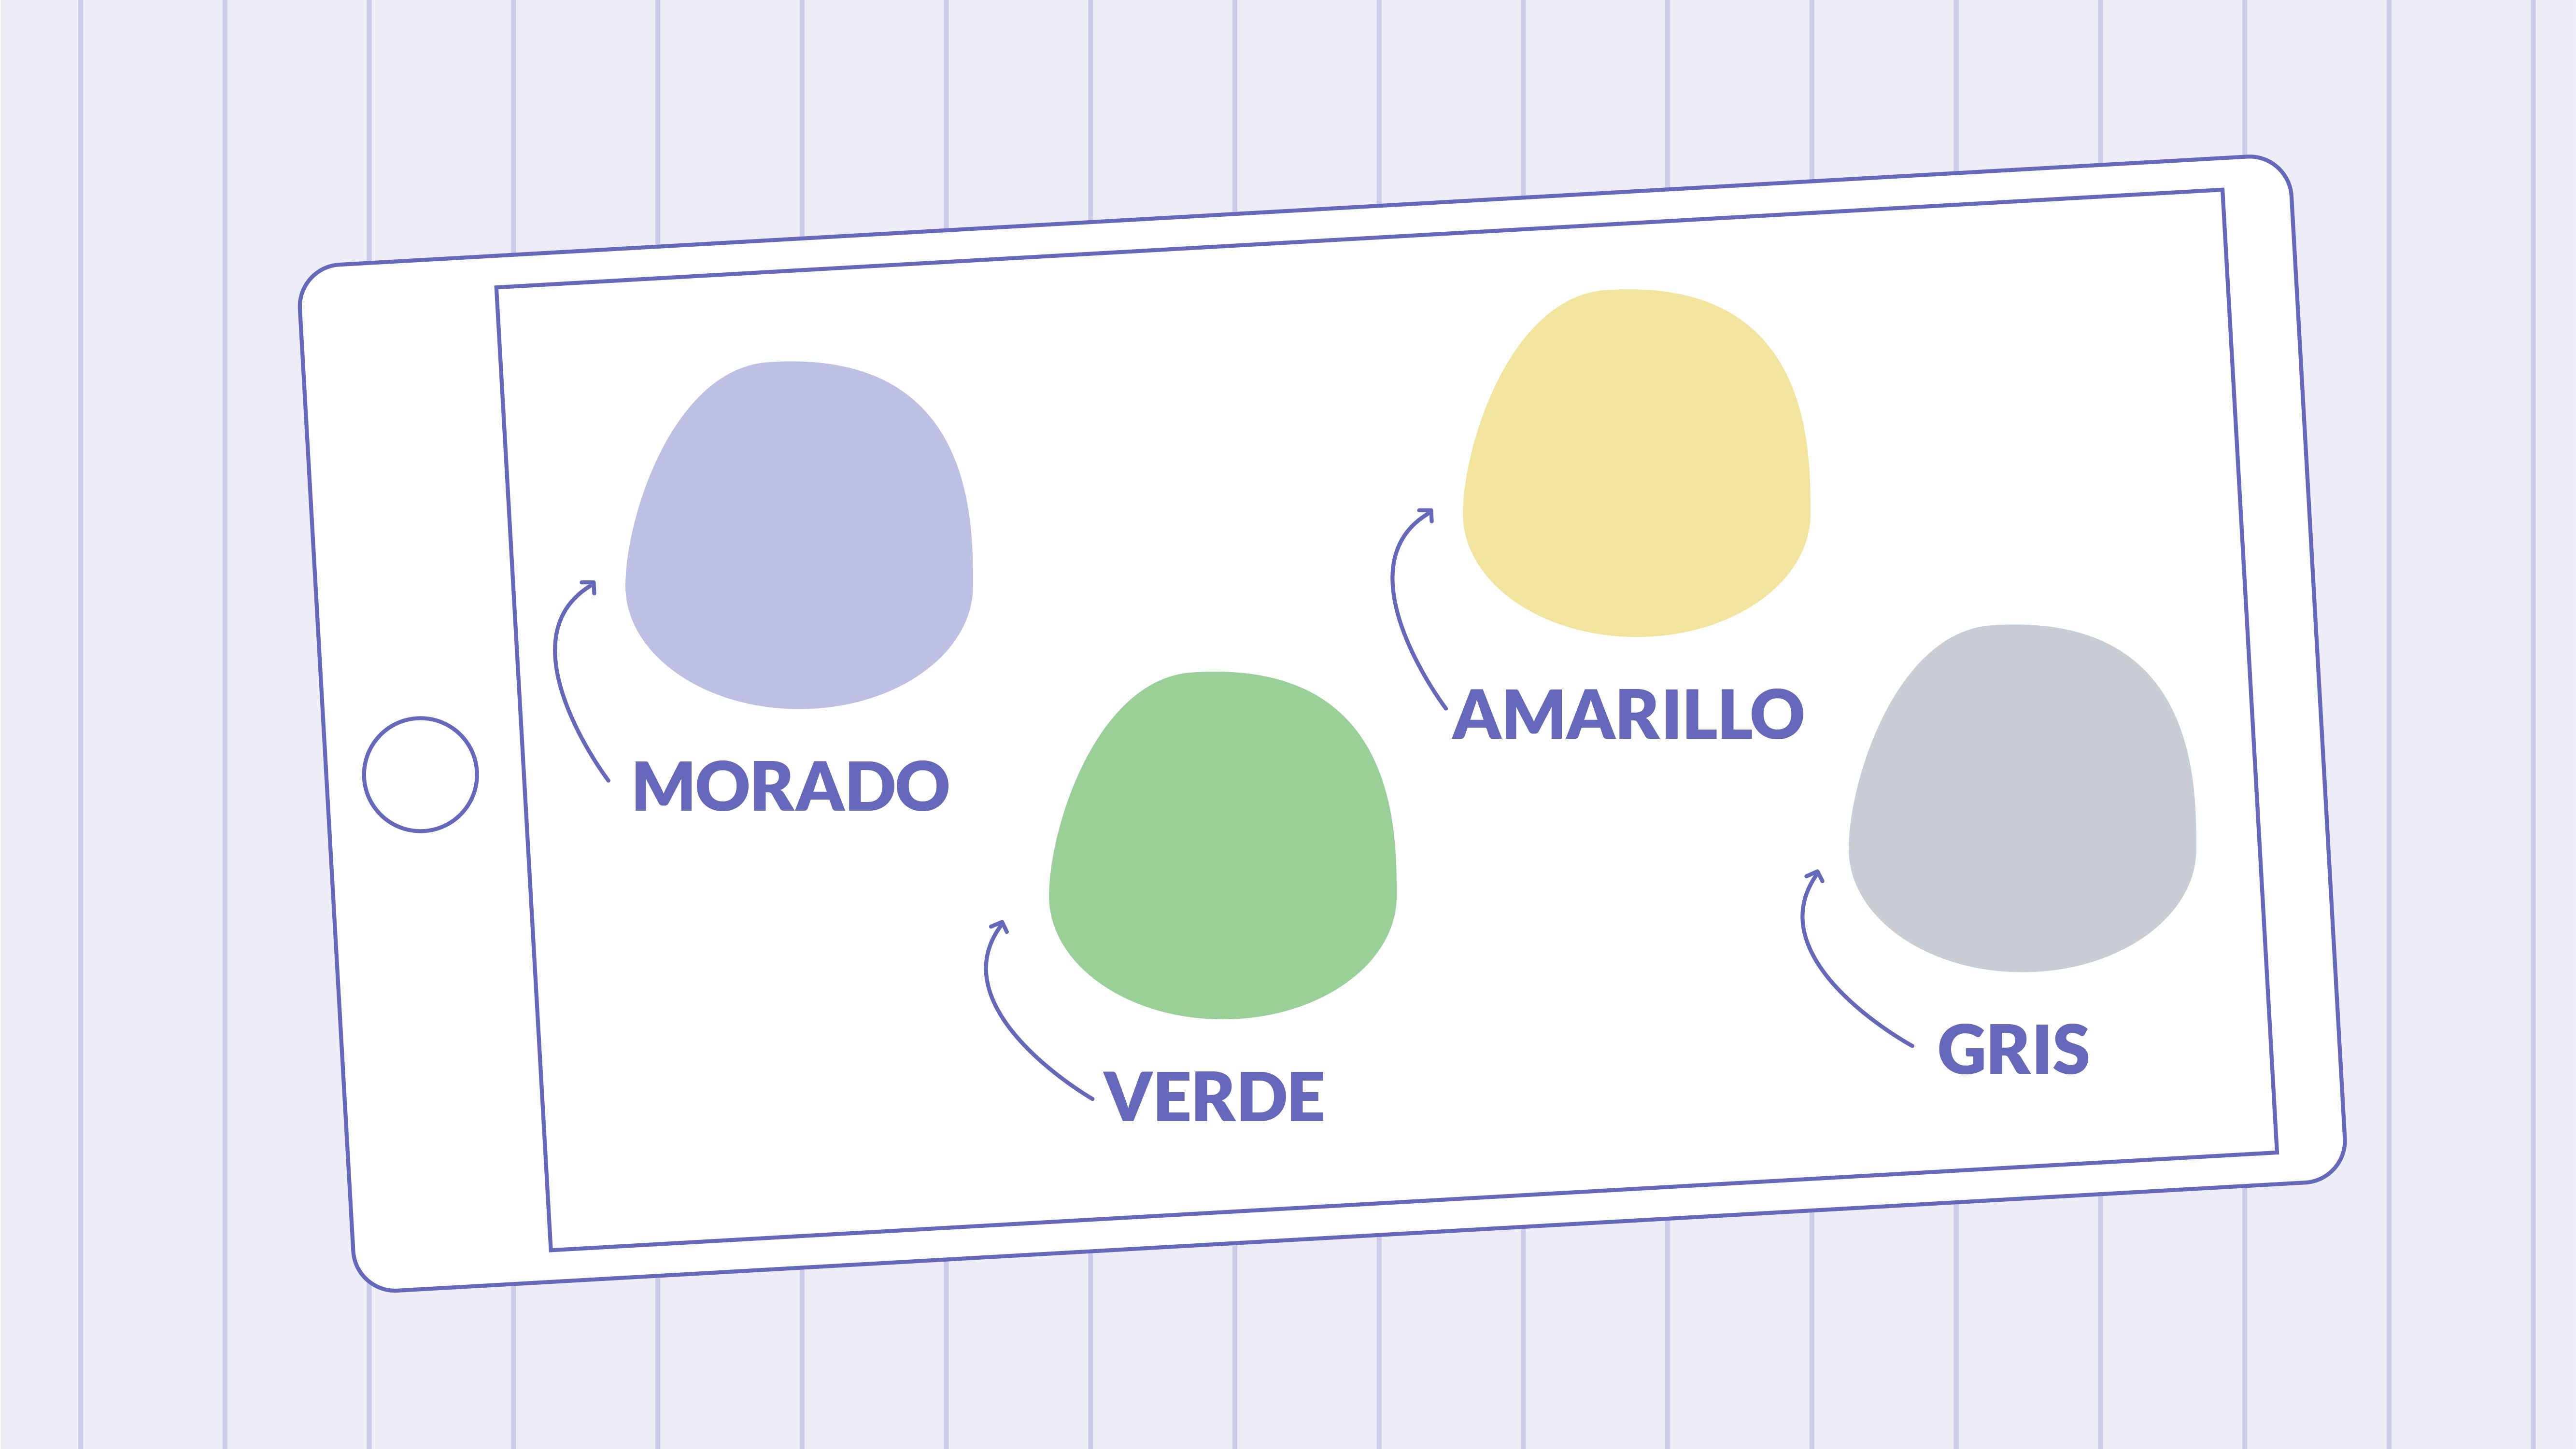  a tablet screen showing different colors (purple = morado, green = verde, yellow = amarillo, grey = gris). 